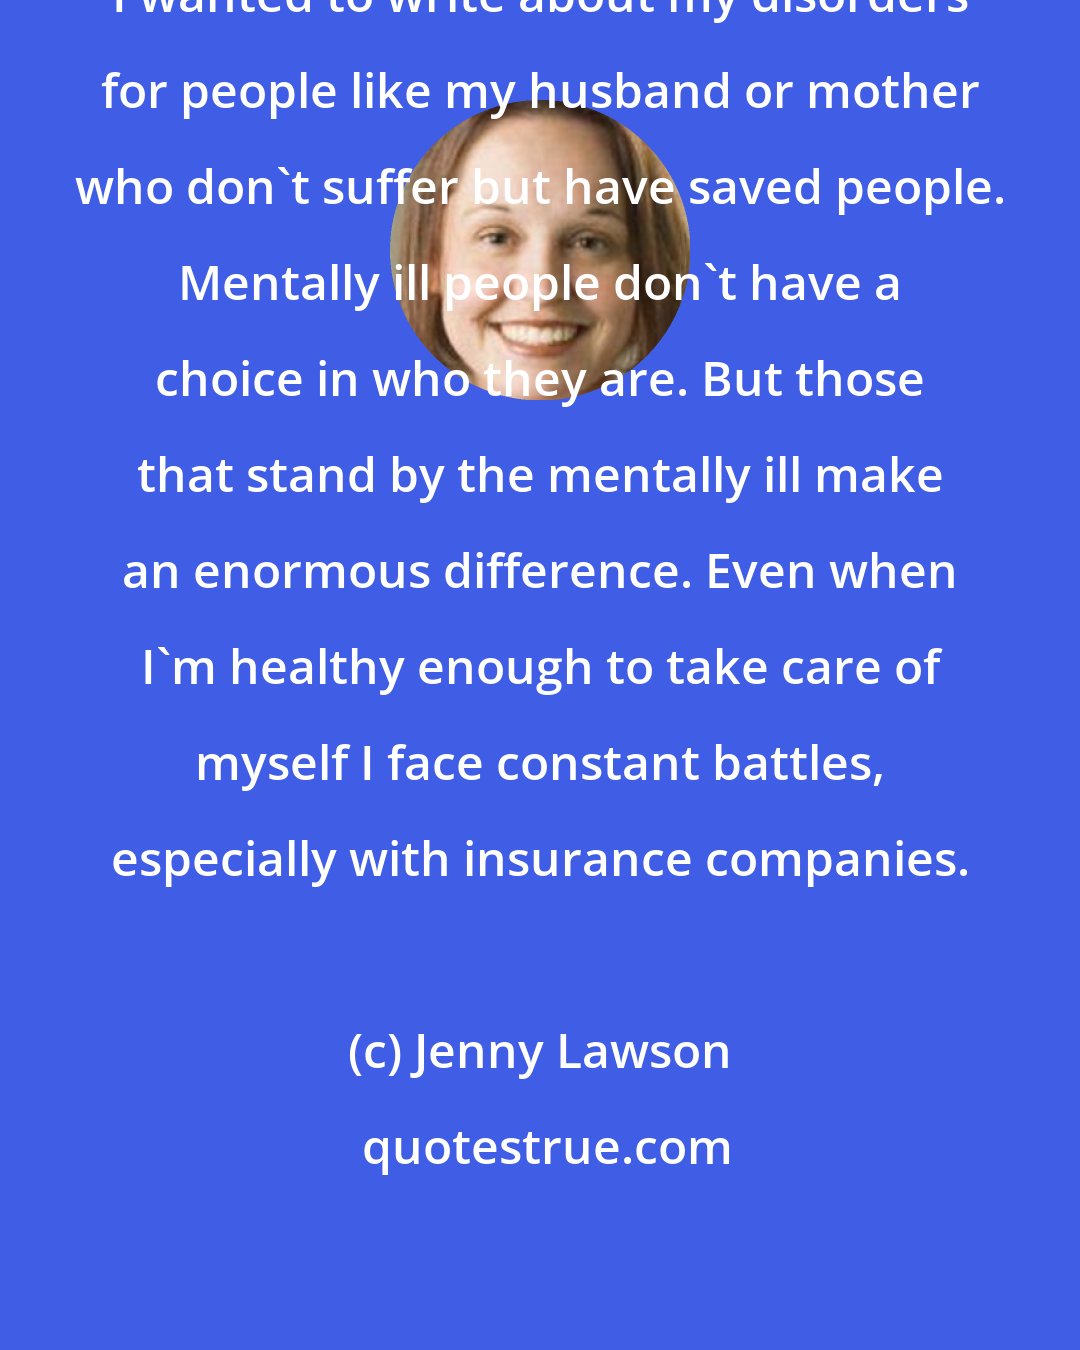 Jenny Lawson: I wanted to write about my disorders for people like my husband or mother who don't suffer but have saved people. Mentally ill people don't have a choice in who they are. But those that stand by the mentally ill make an enormous difference. Even when I'm healthy enough to take care of myself I face constant battles, especially with insurance companies.